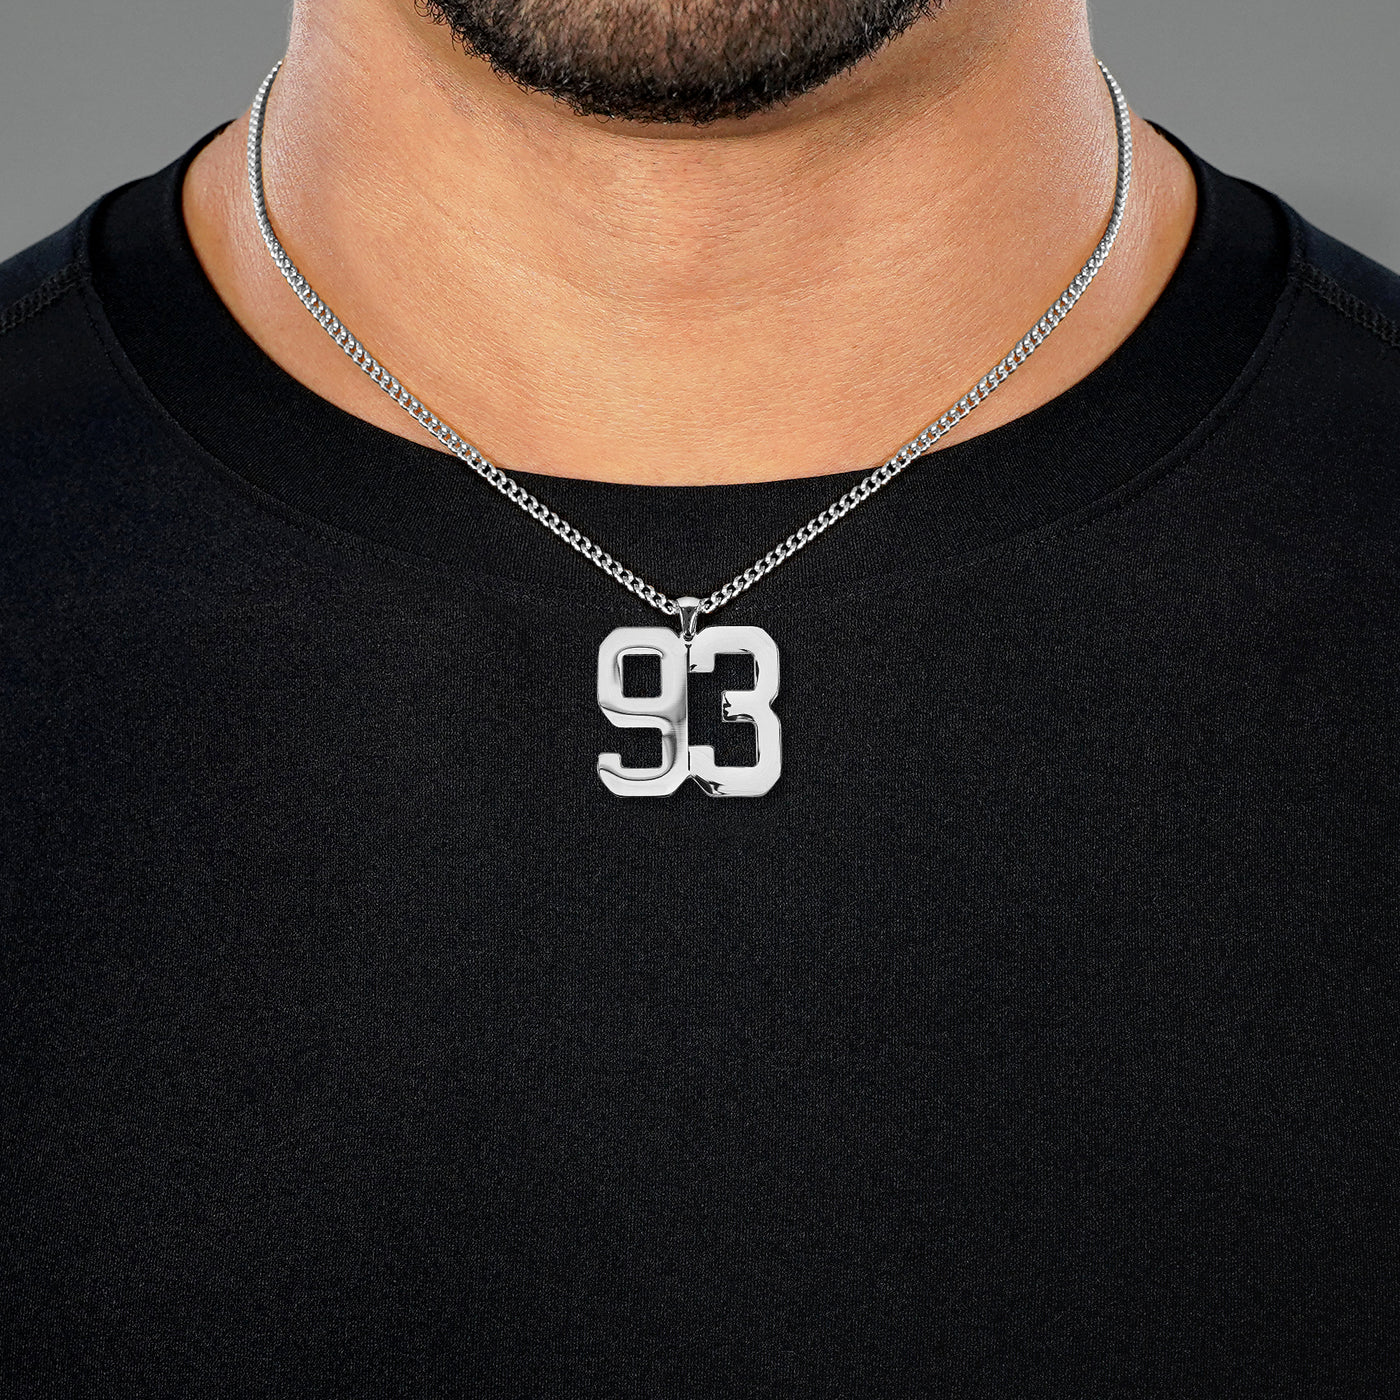 93 Number Pendant with Chain Necklace - Stainless Steel